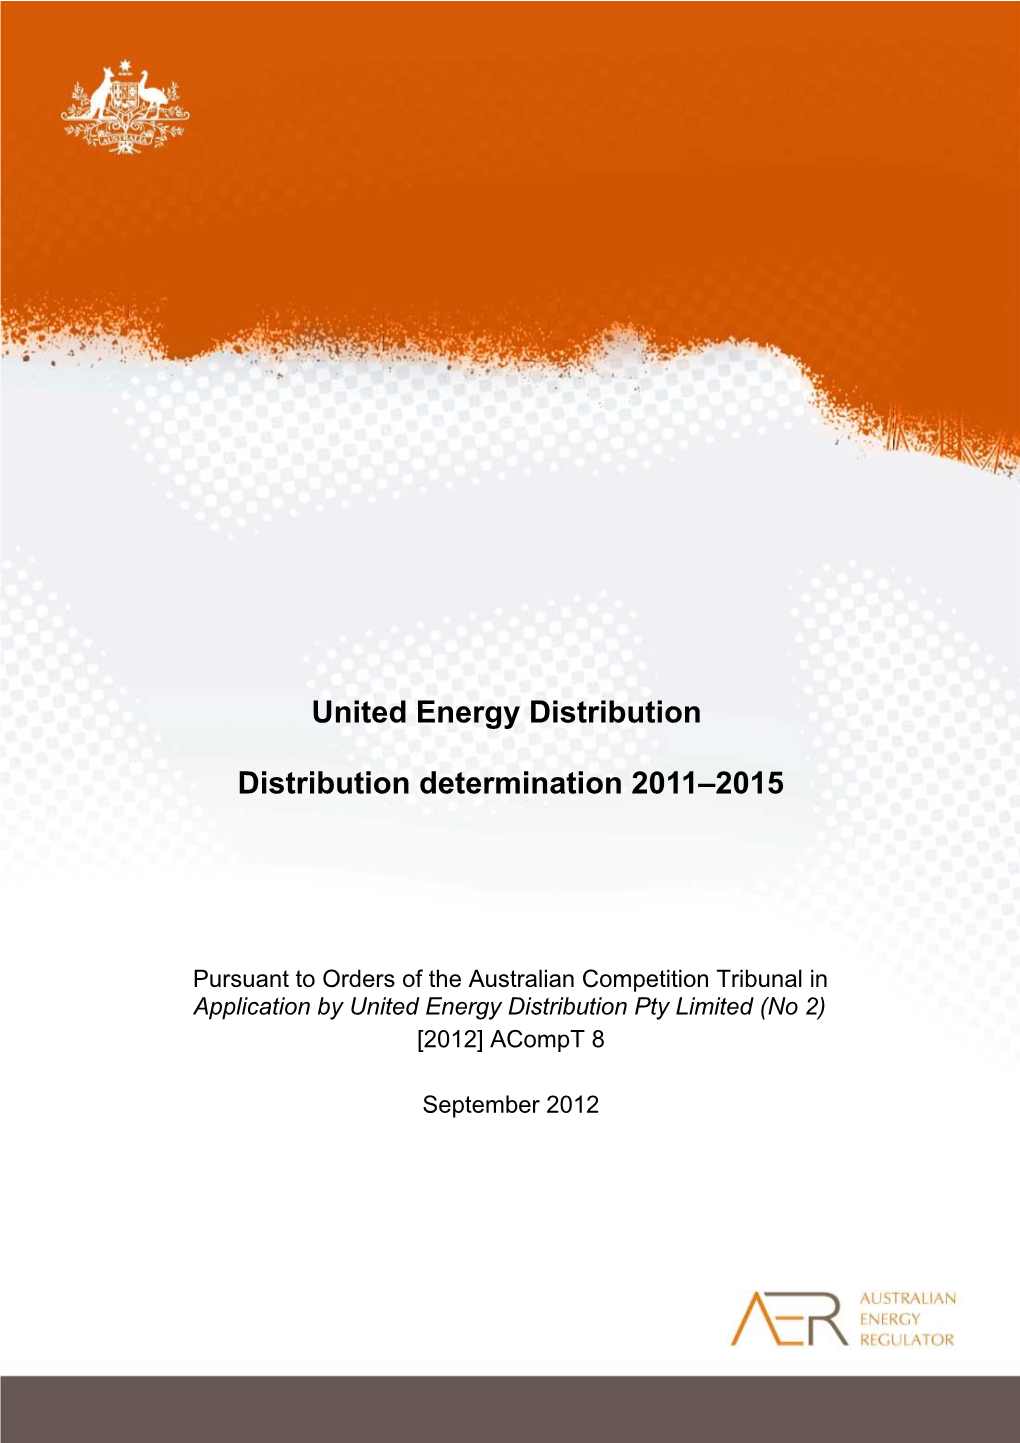 United Energy Distribution Determination Amended in Accordance with the Orders of the Tribunal